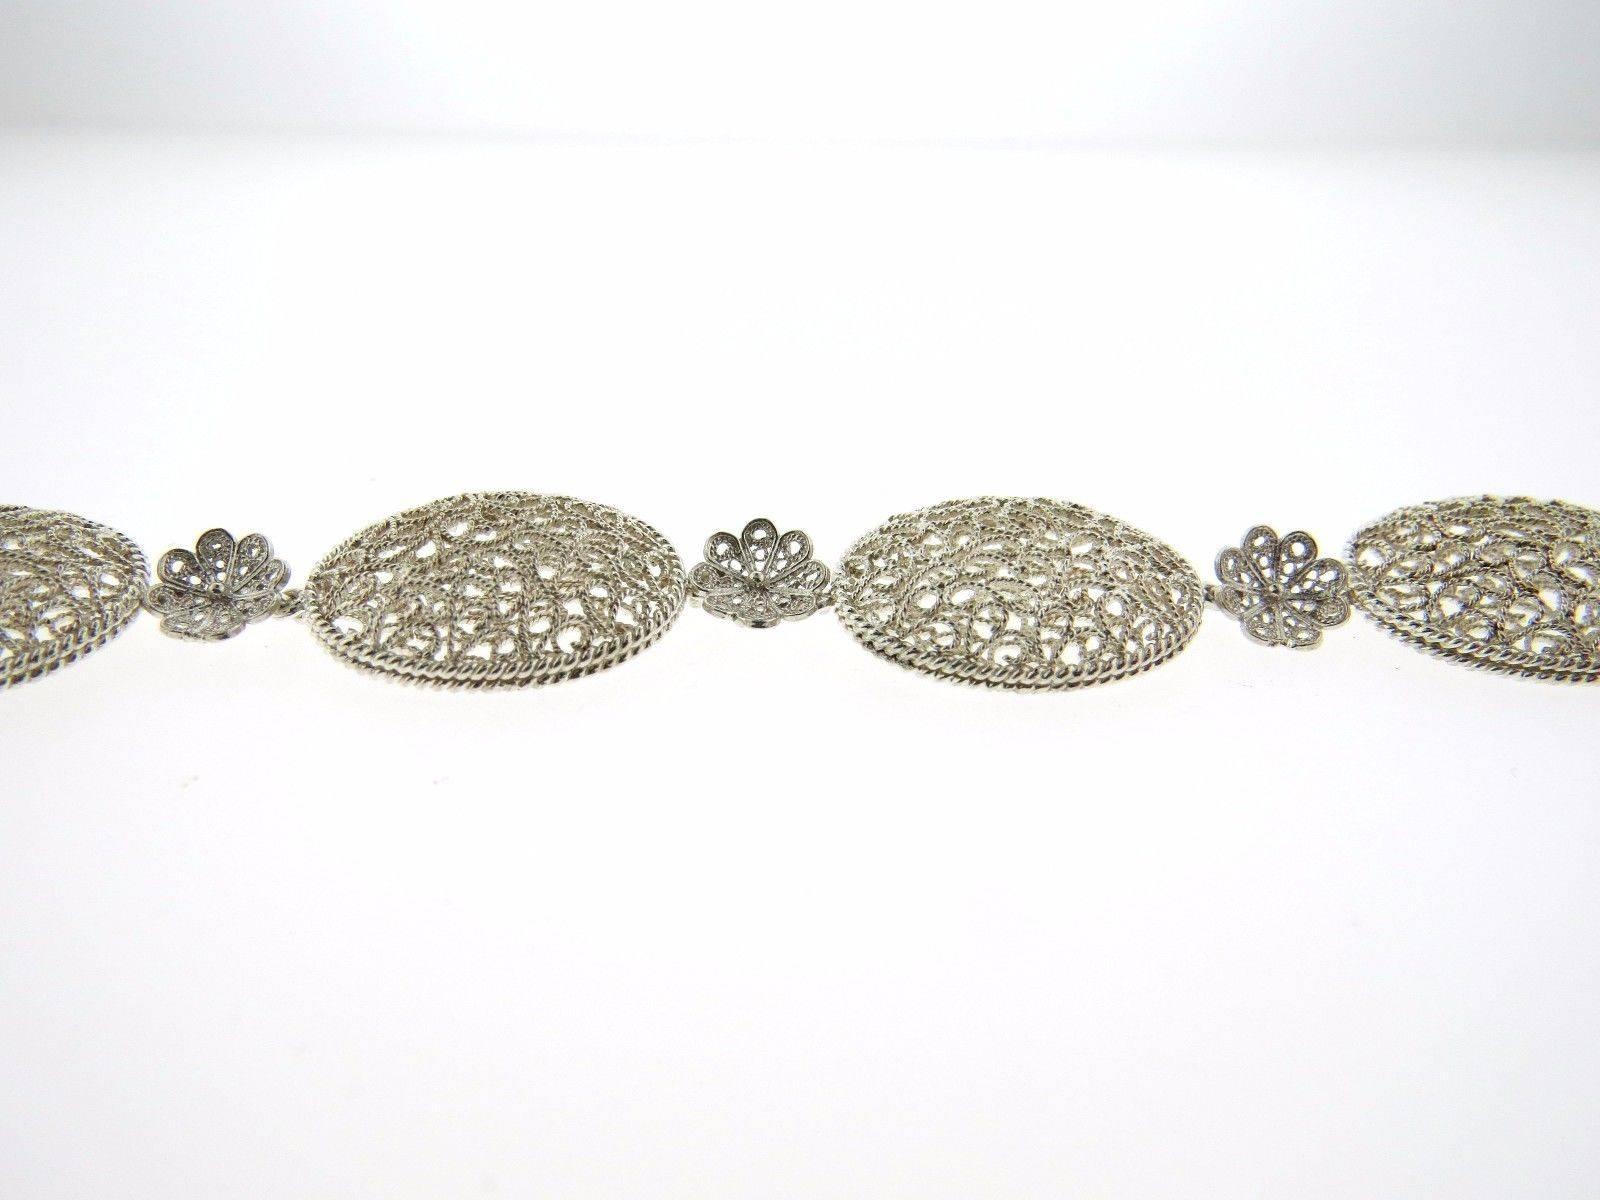 A sterling silver bracelet by Buccellati.  The bracelet measures 7.5" long and is 17.5mm wide.  The weight of the piece is 13.2 grams.  Marked: Buccellati 925.  Comes with Buccellati paperwork.